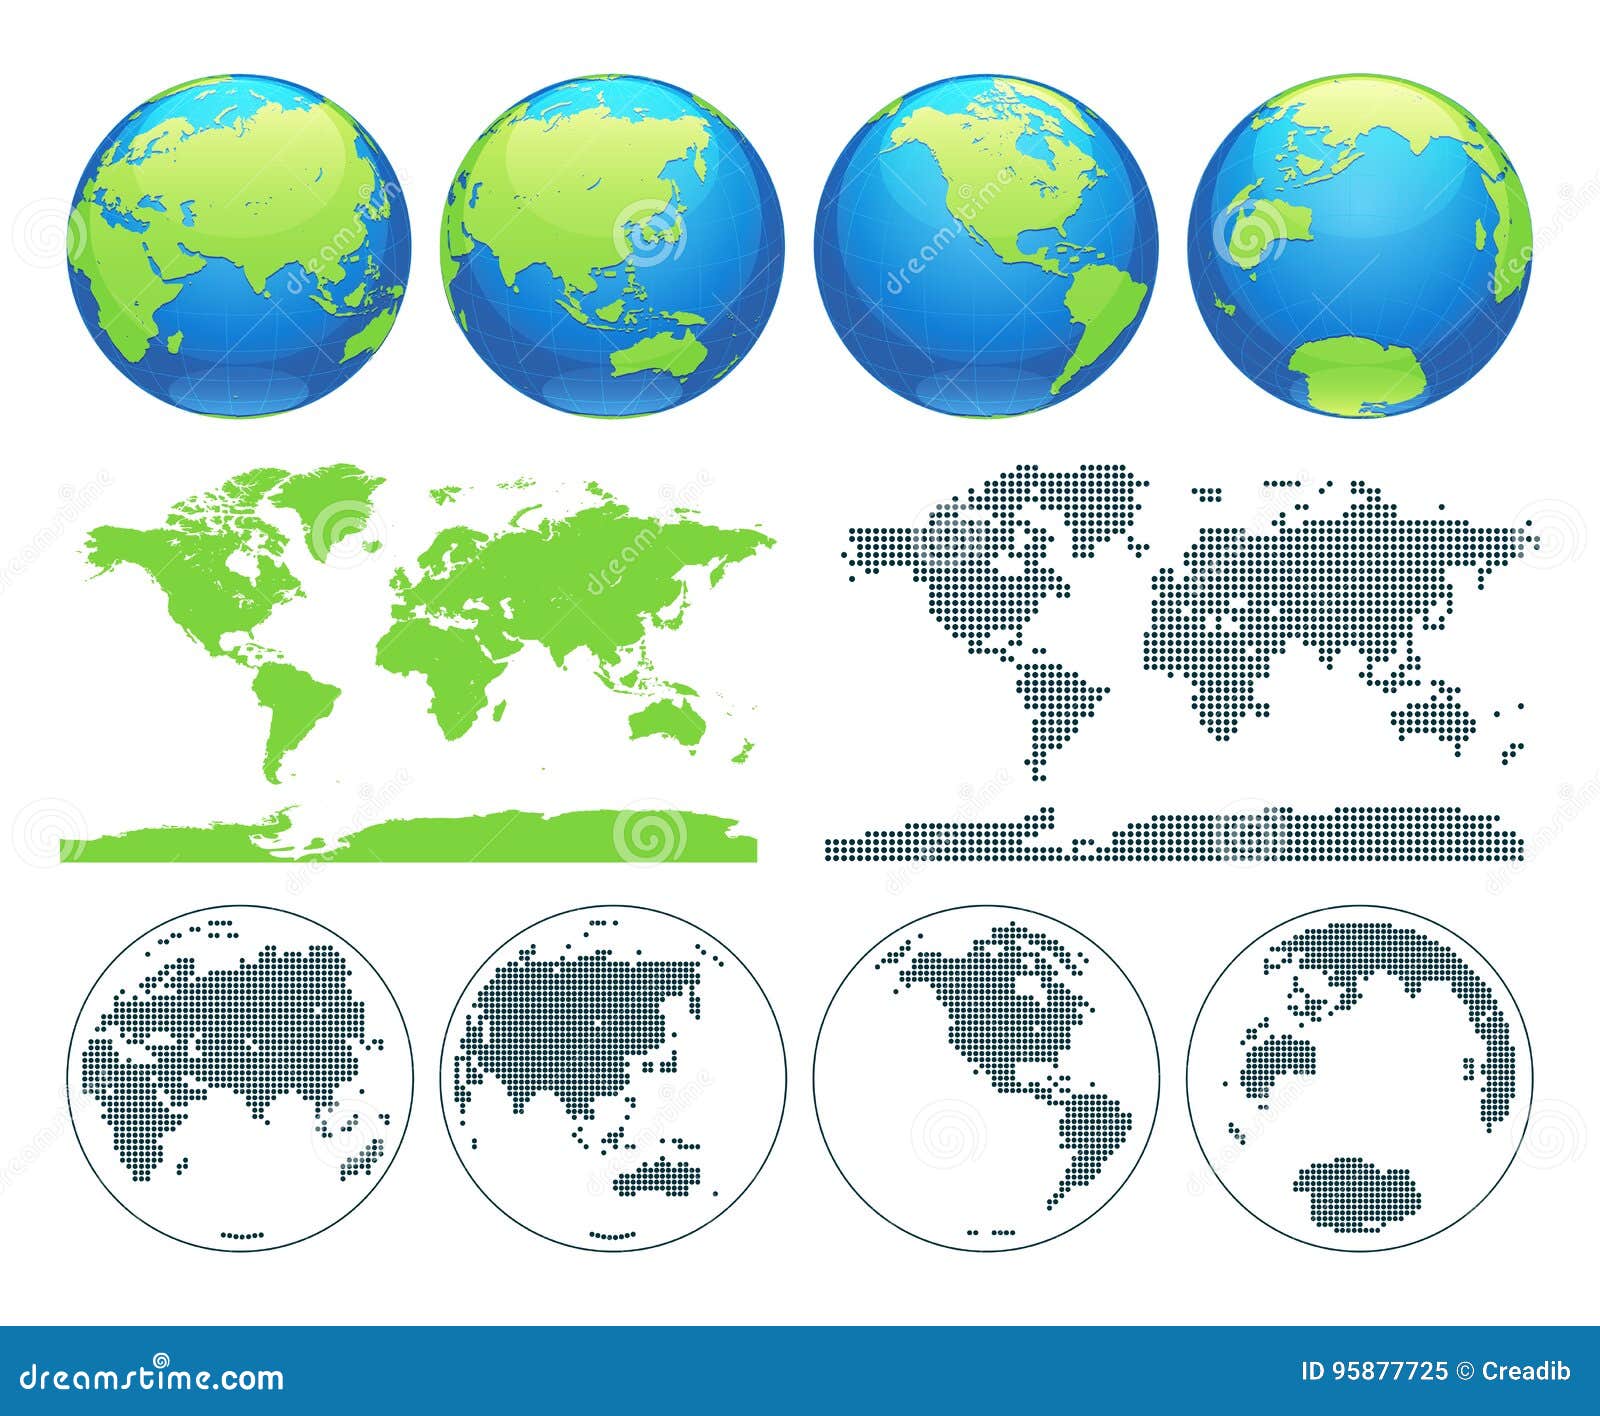 globes showing earth with all continents. digital world globe . dotted world map .